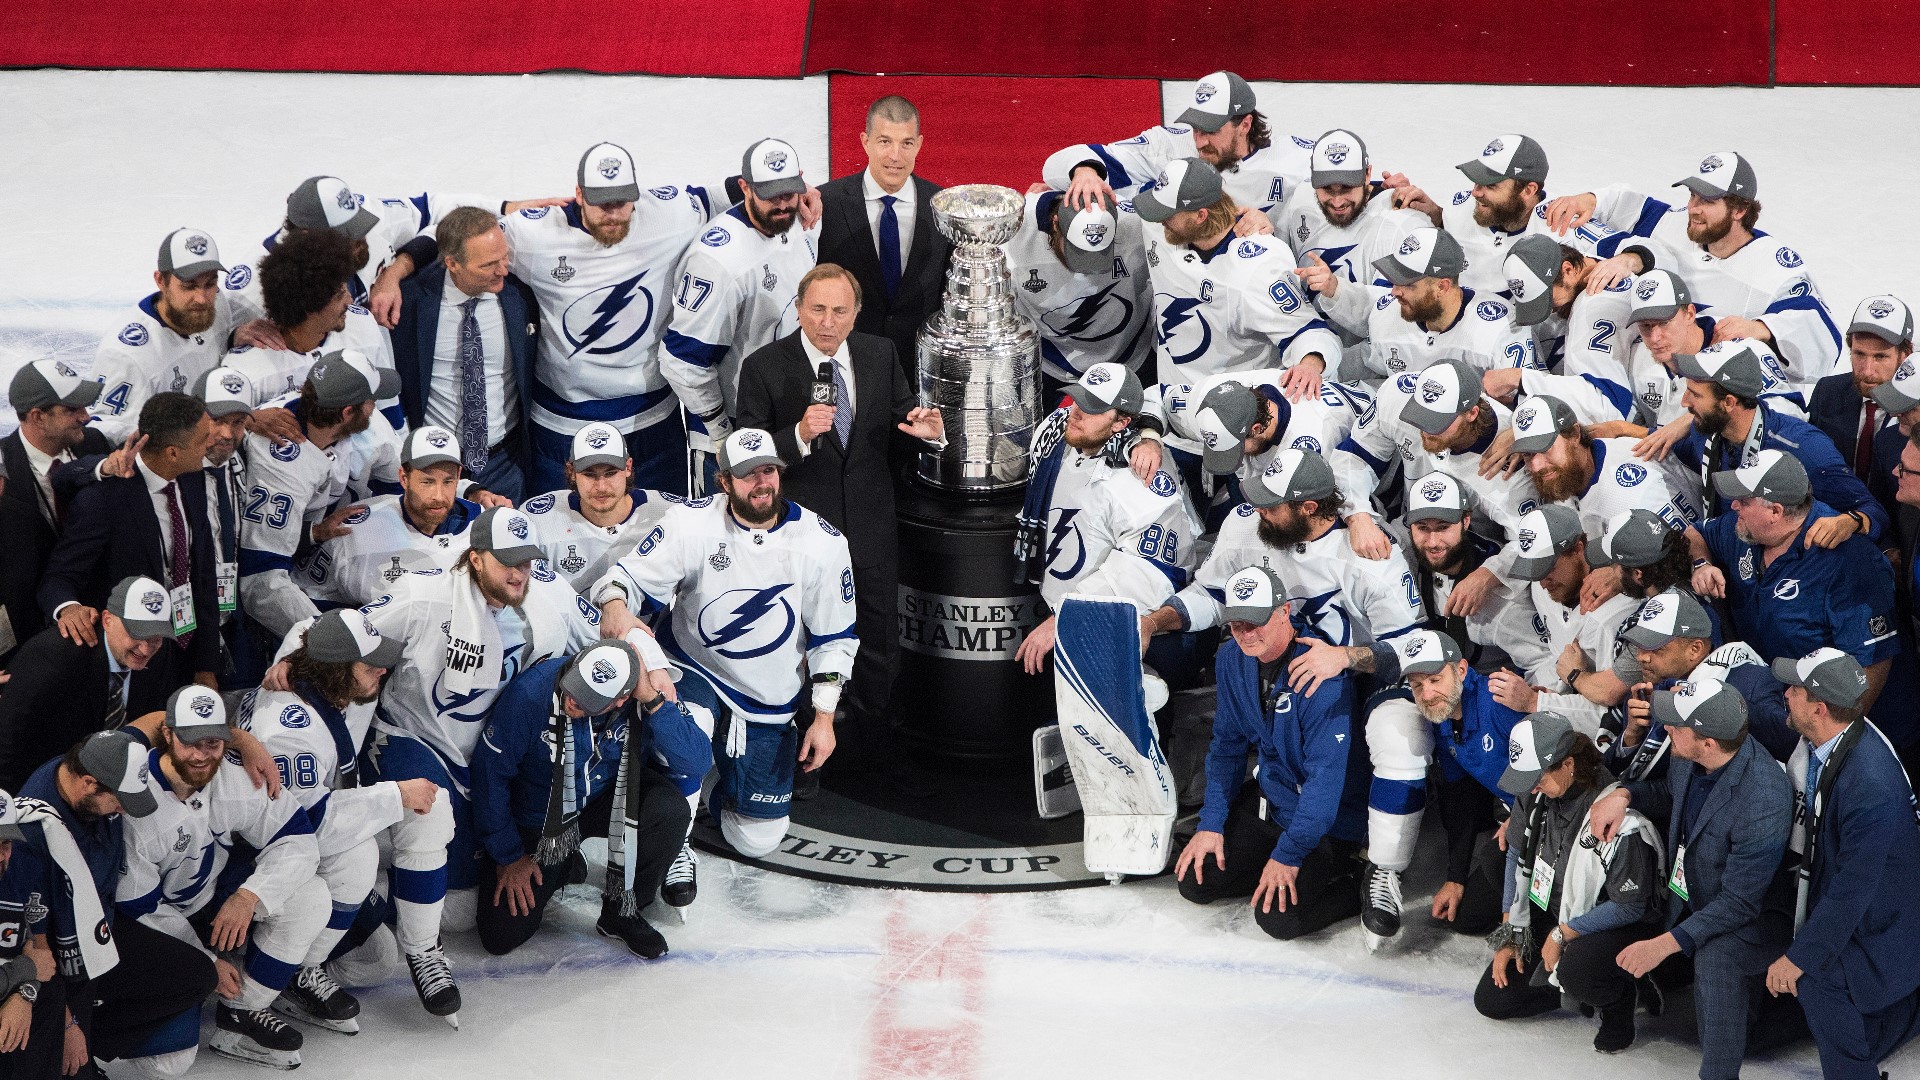 Stanley Cup 2020: Tampa Bay Lightning win over Dallas Stars | wltx.com